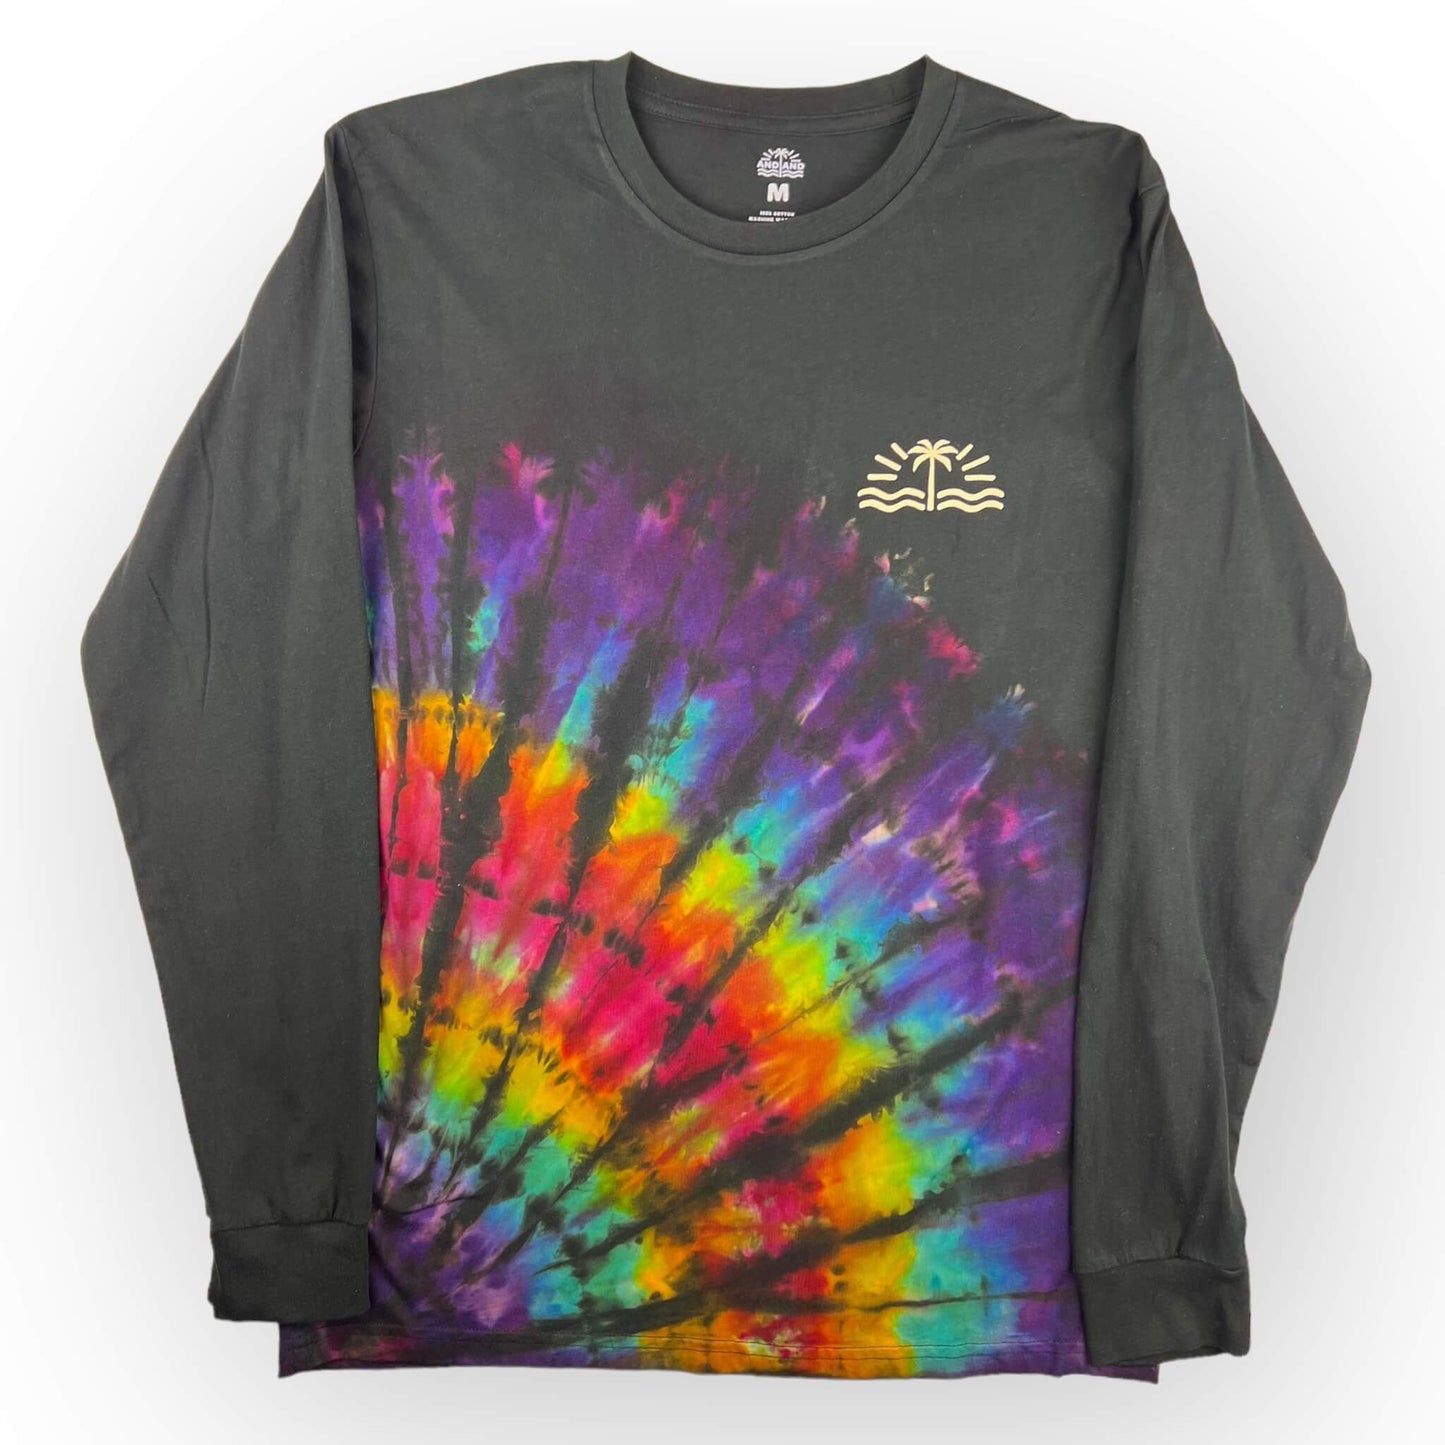 Reverse Tie Dye Long Sleeve Tee - Adults Medium (Discounted for Small Fault)